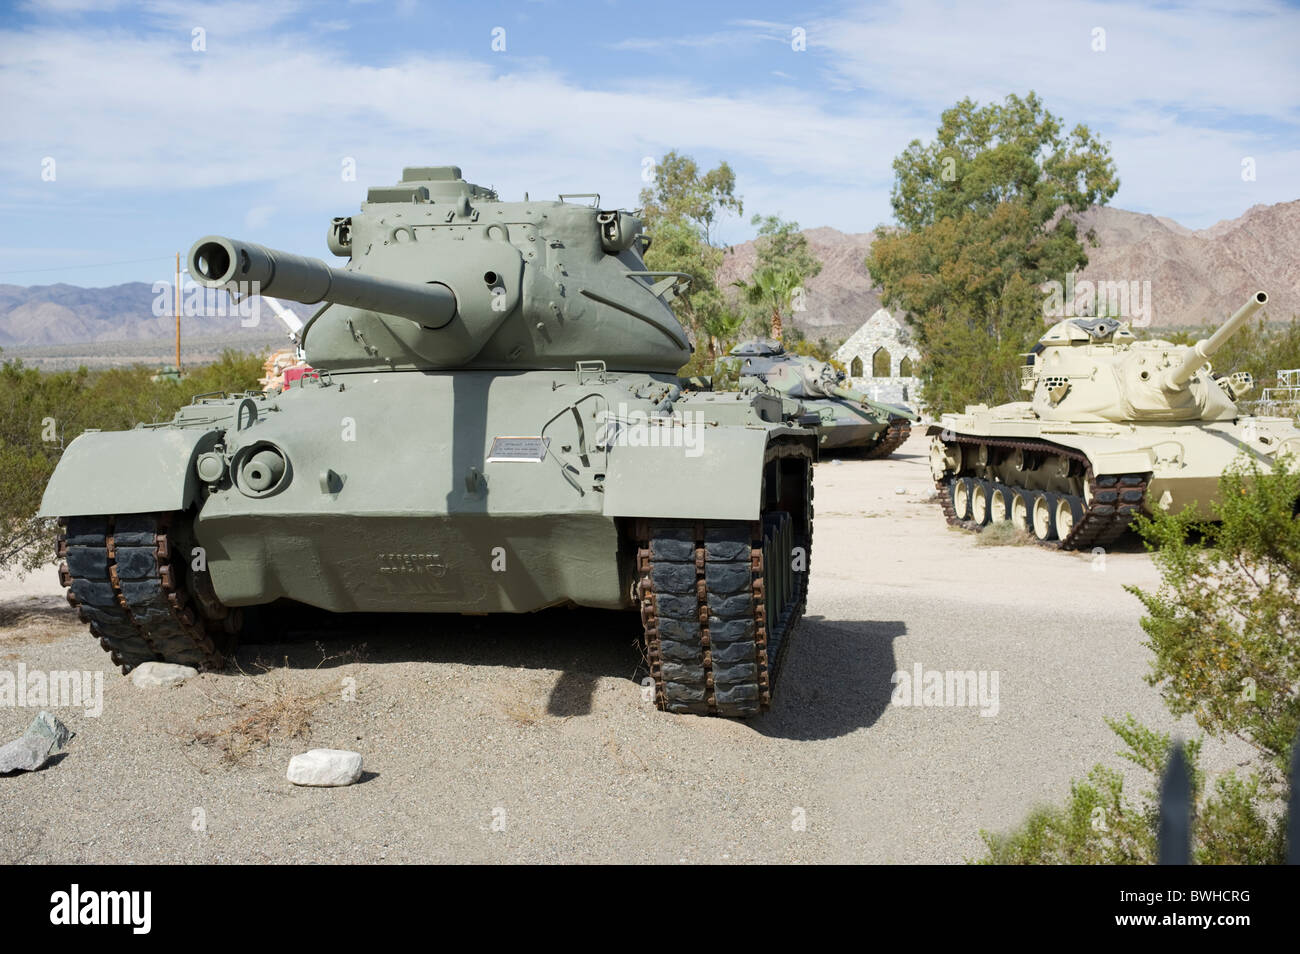 Tanks on display at the General Patton Memorial Museum in Chiriaco Summit, Indio, California, USA Stock Photo